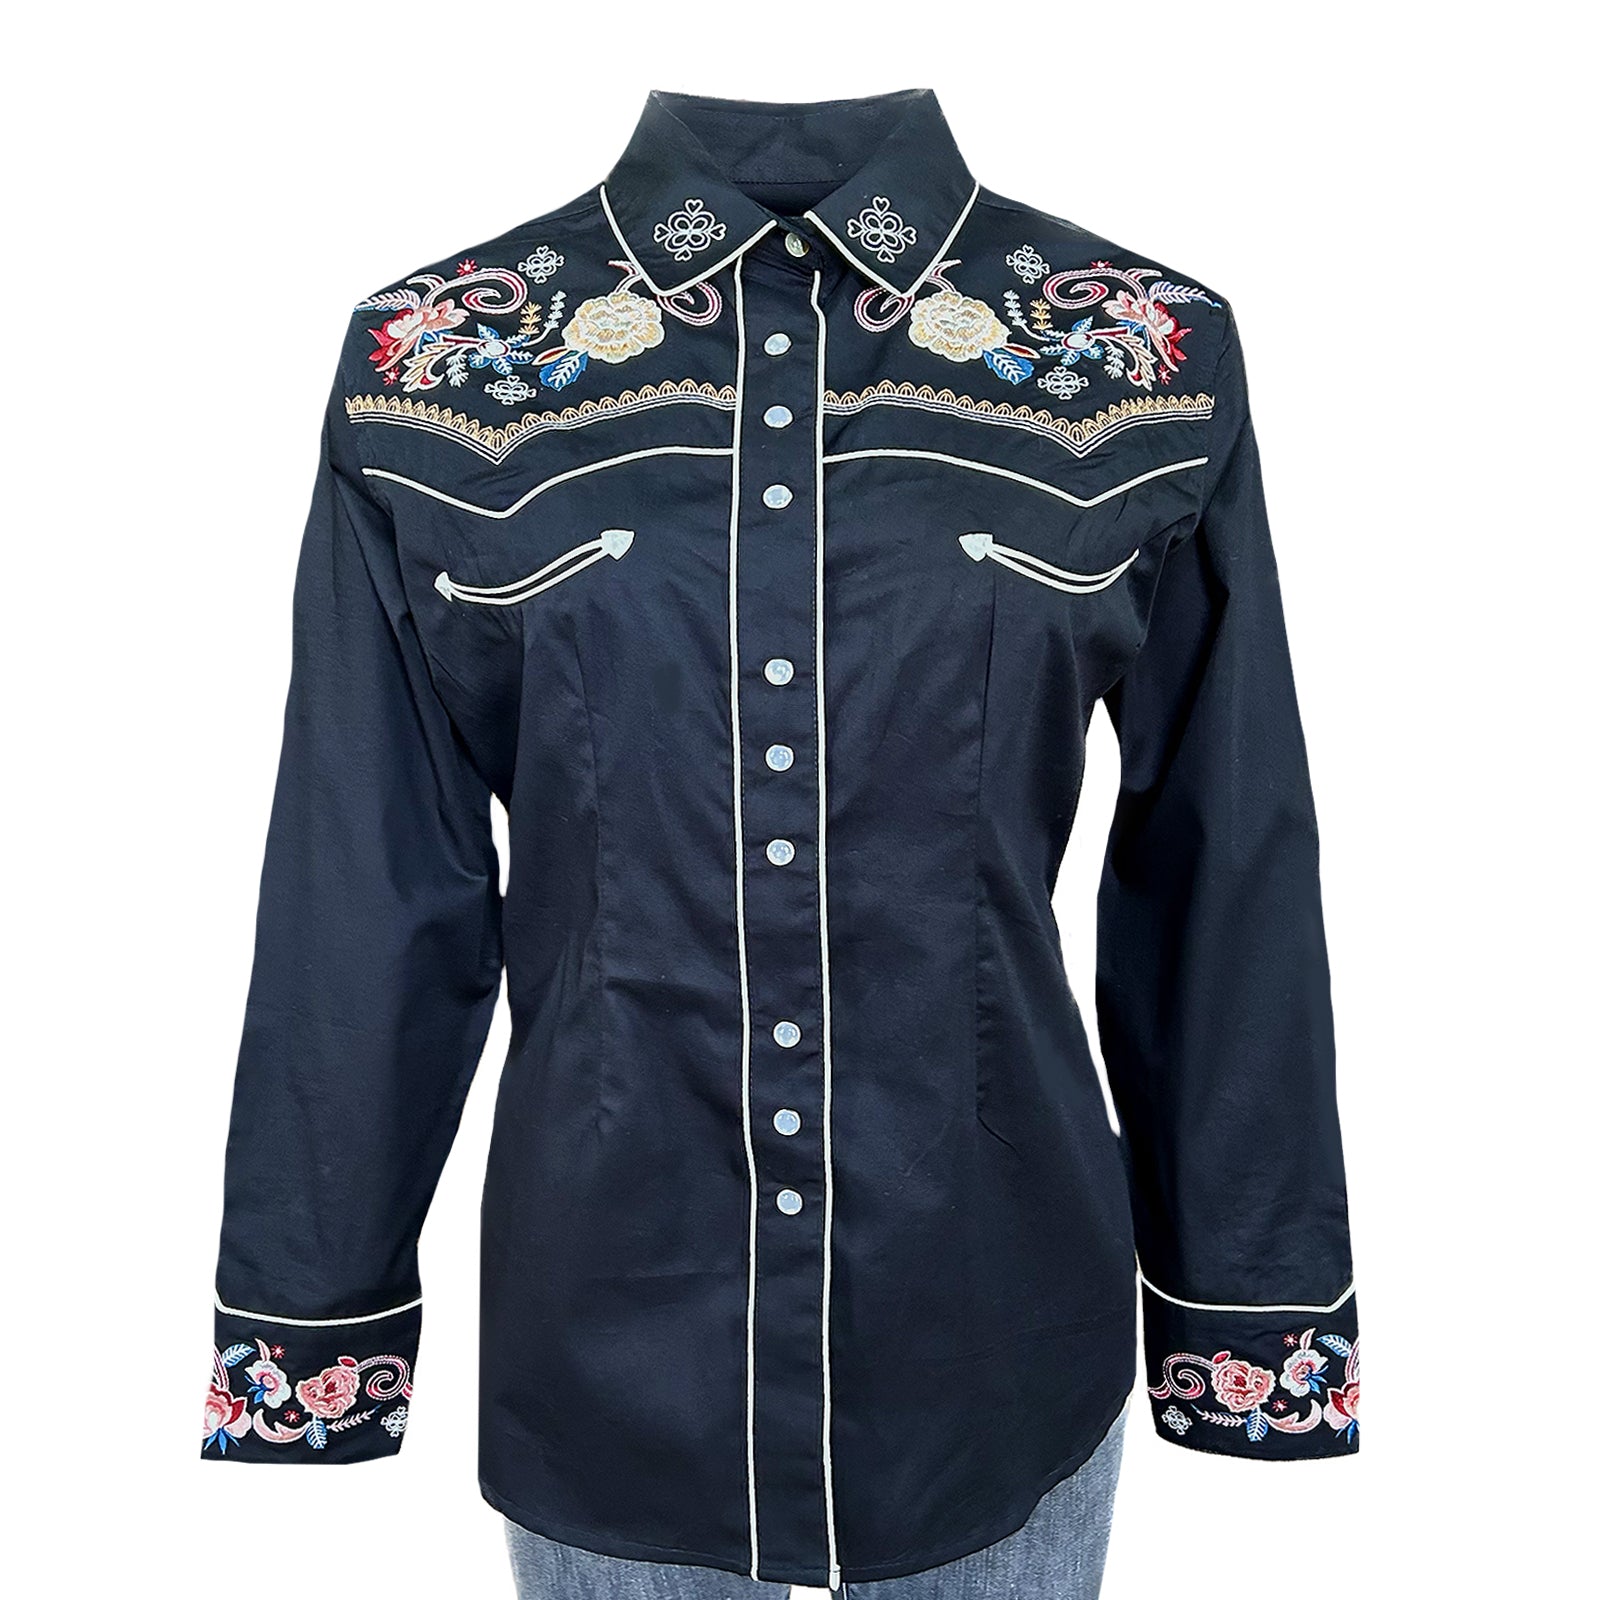 Women’s Vintage Floral & Stars Embroidered Shirt